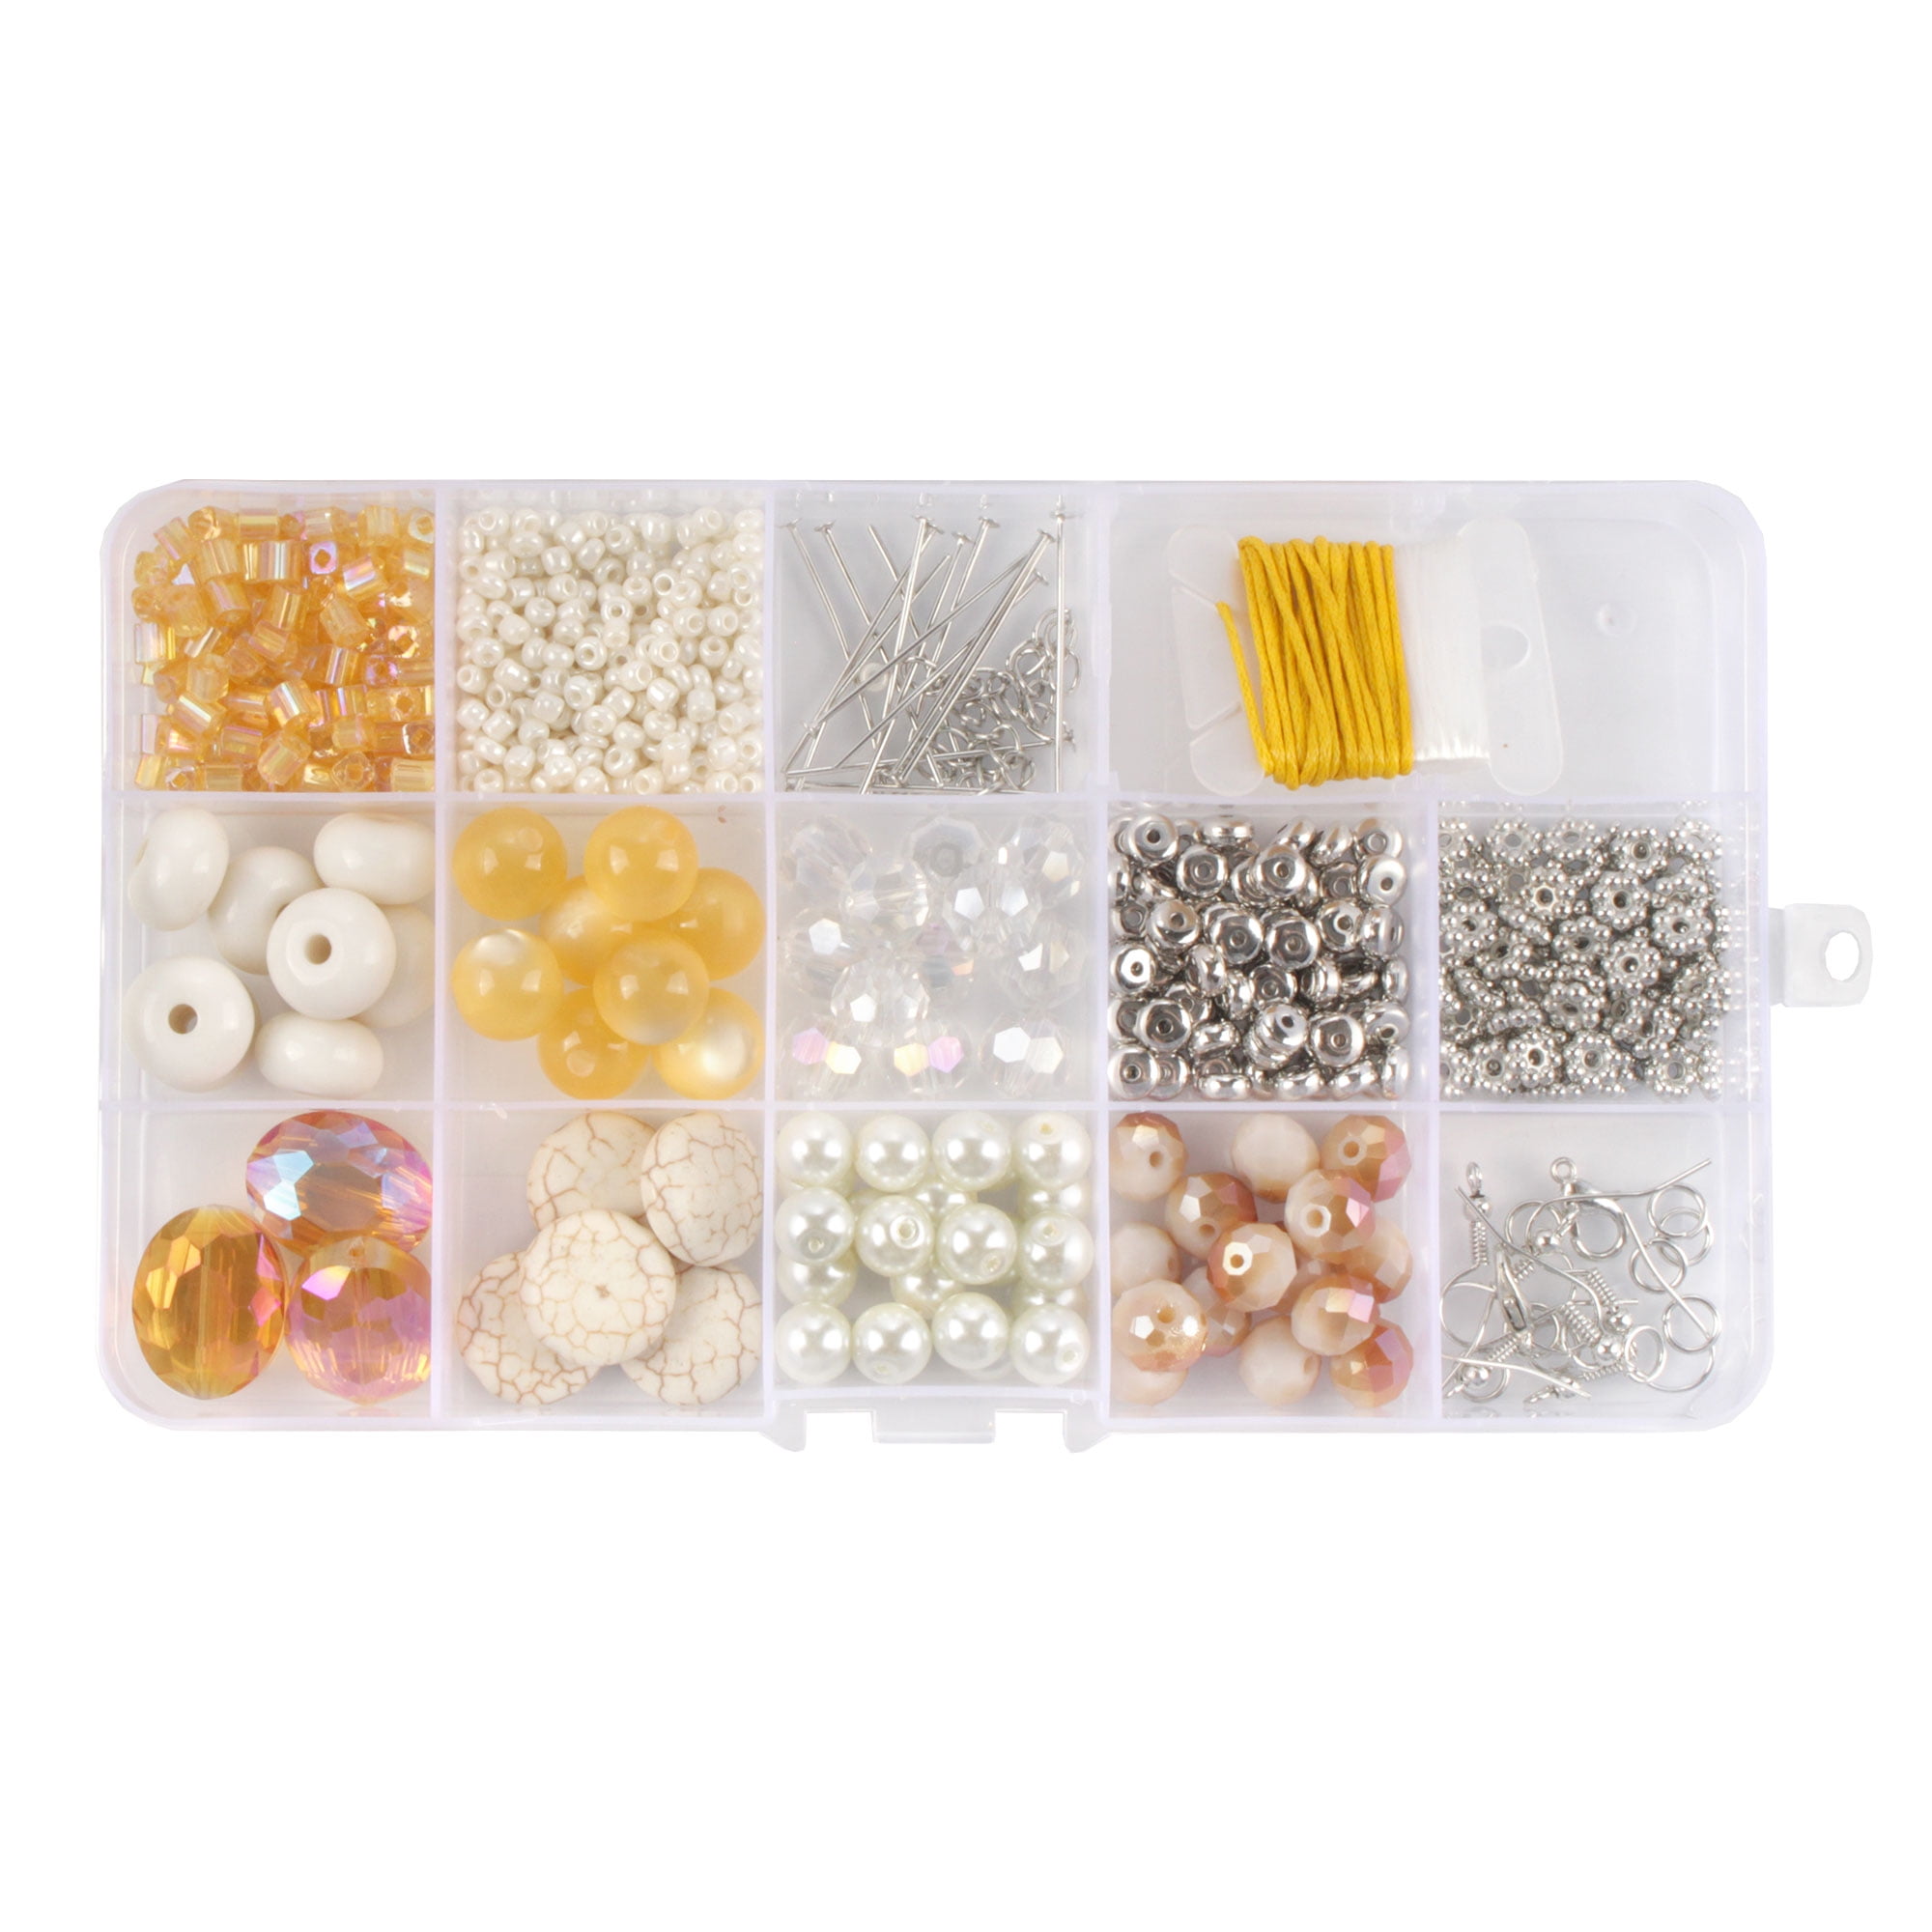 Bead Kits for Jewerly Making - 600pcs Bead Craft Set - DIY Bracelets,  Necklaces, and Earrings Supplies Box - Arts and Crafts for Kids, Girls,  Teens, Adults - Pastelle Daydream - Assortment 203 